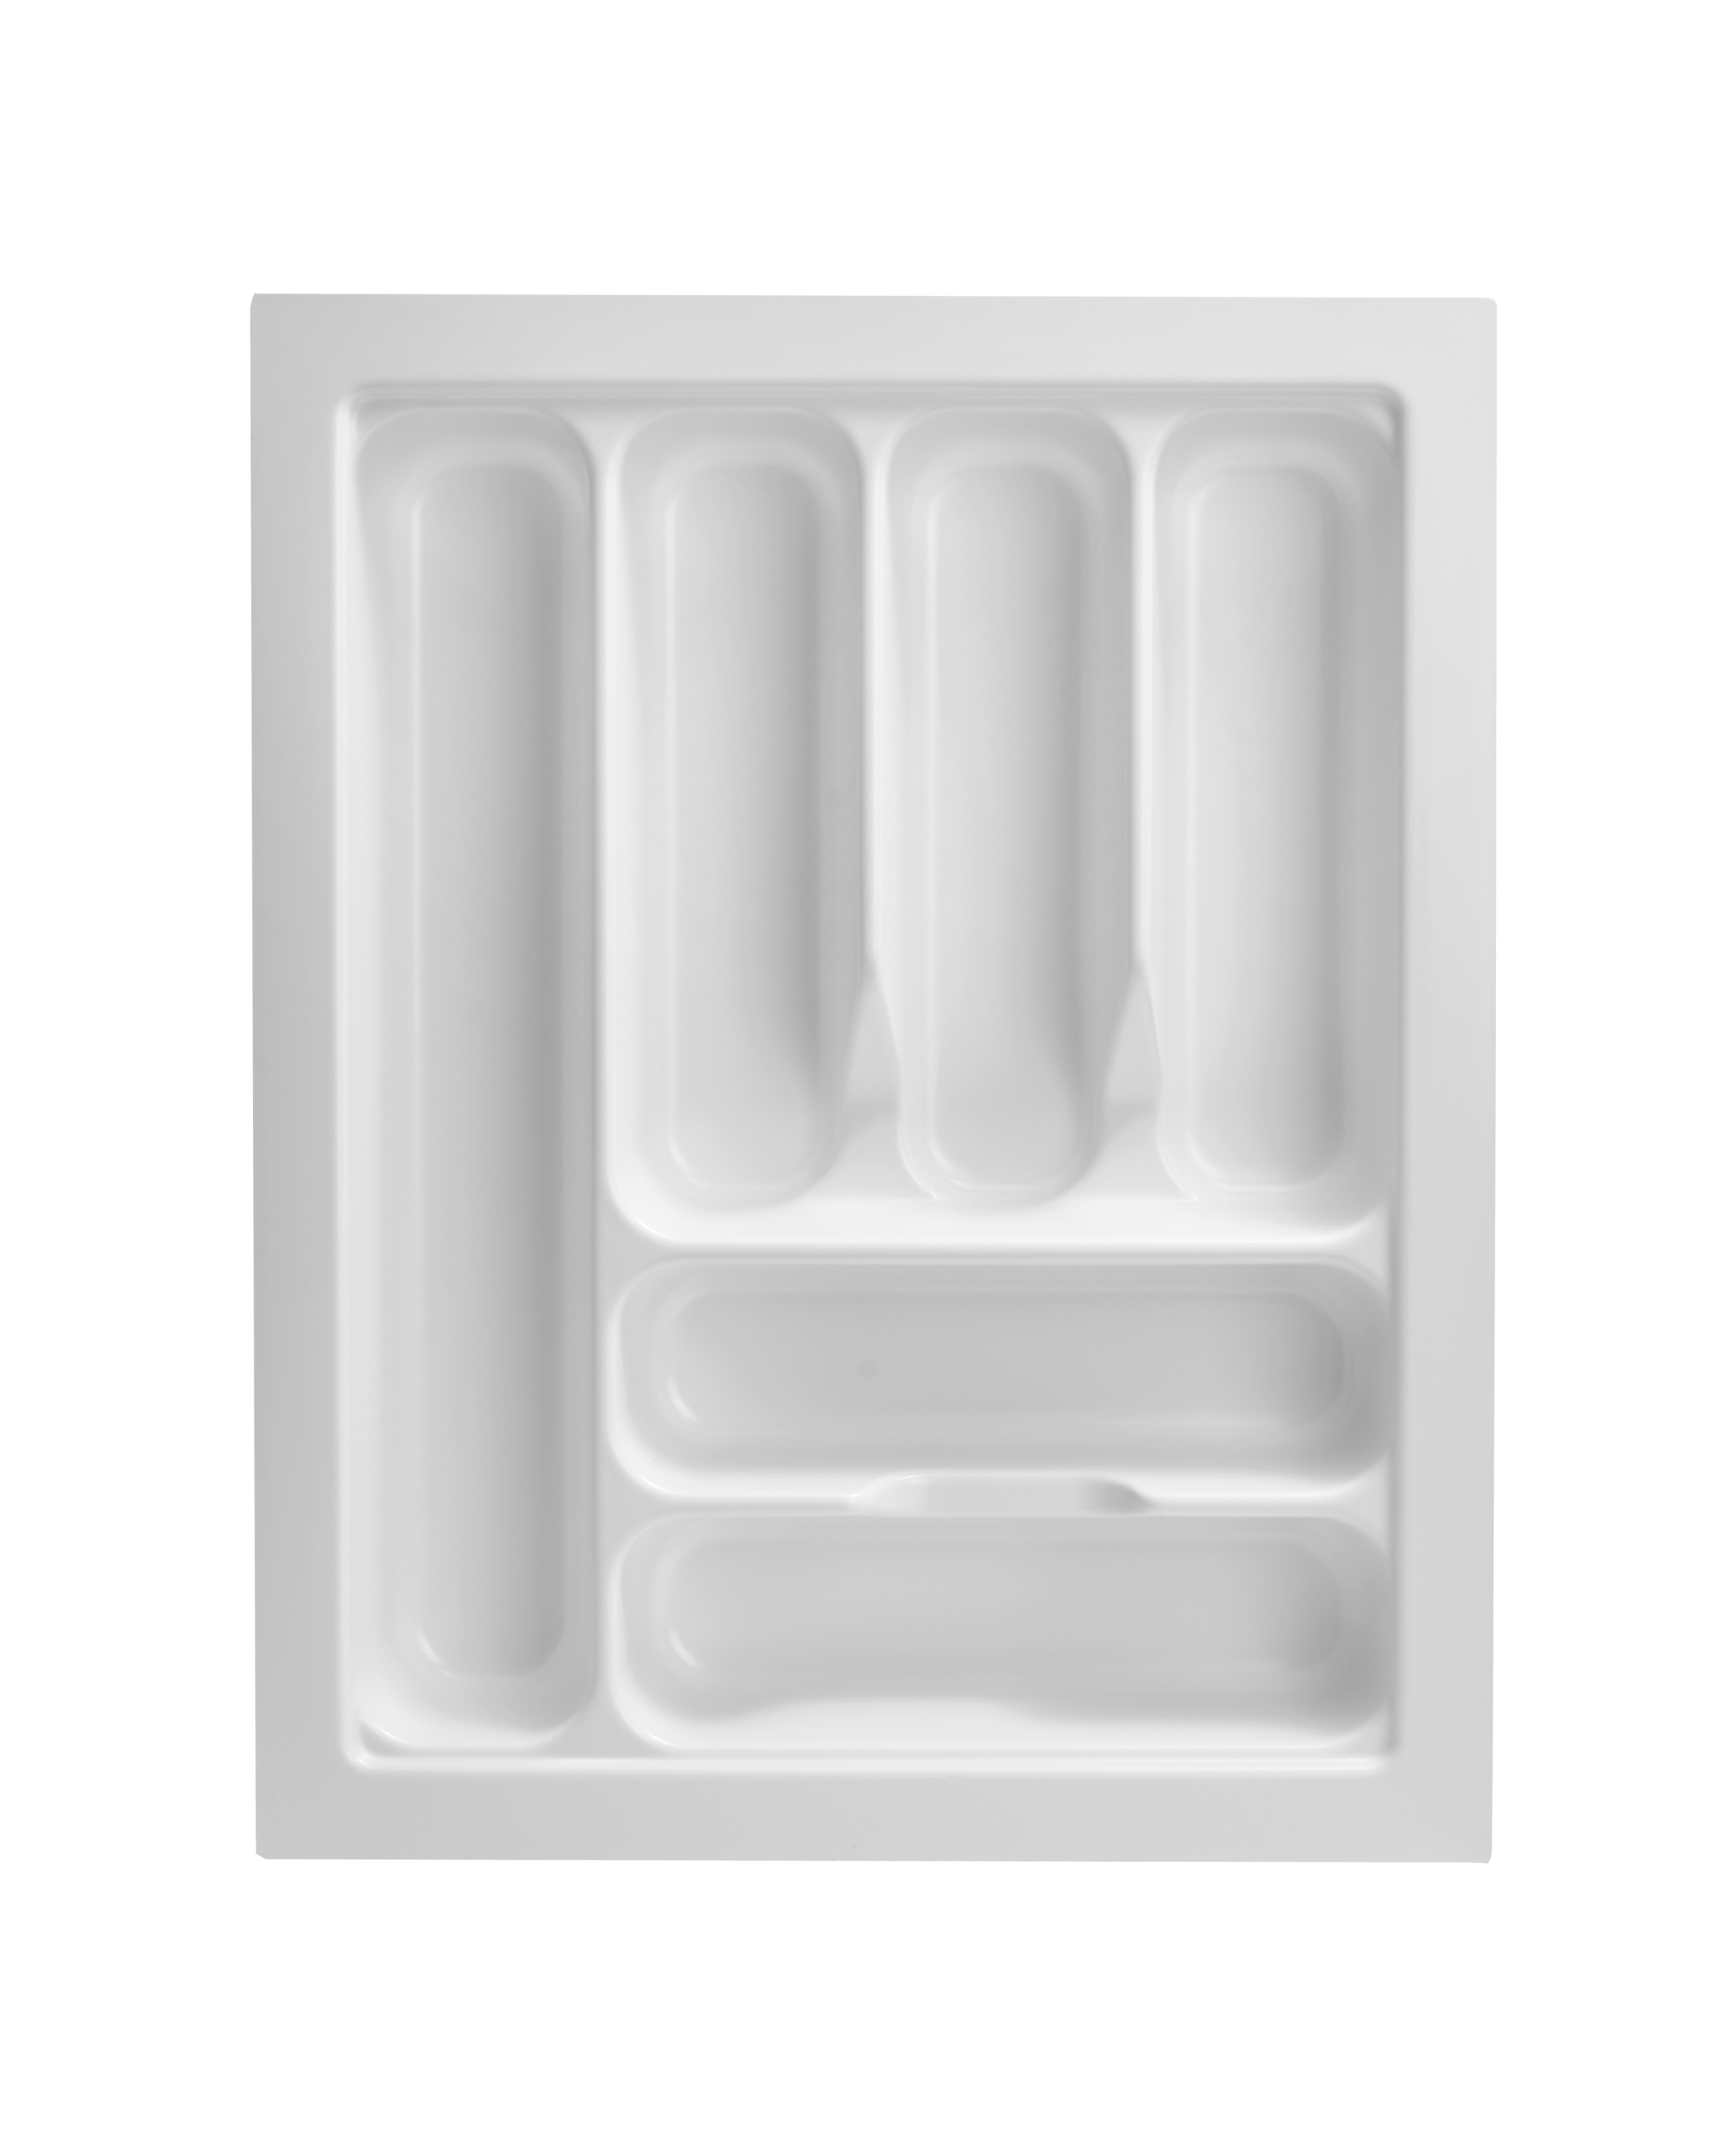 Cutlery tray for cabinet_500mm